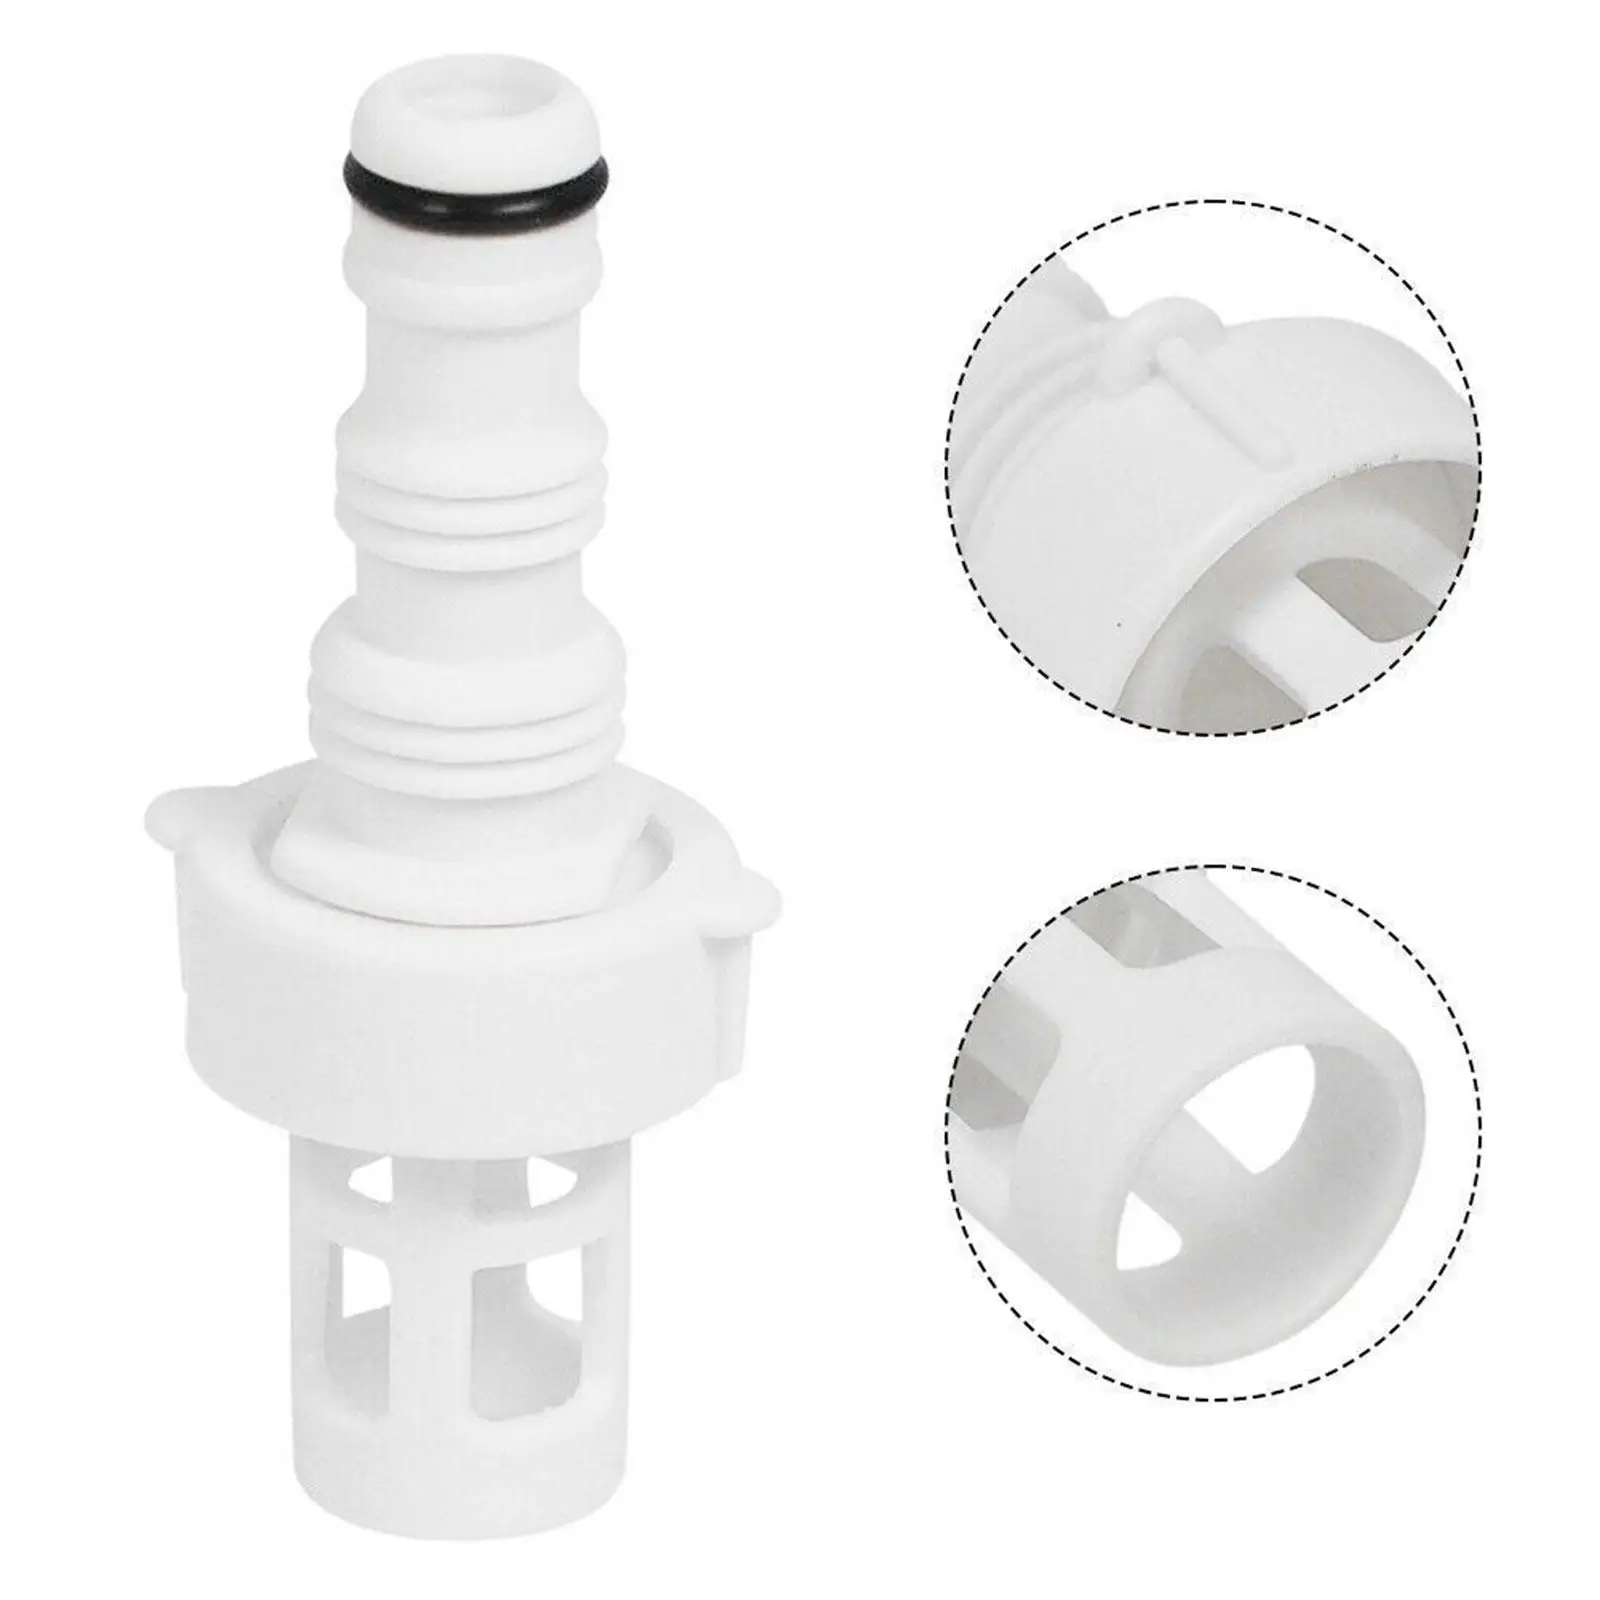 Hose Drain Plug Connector Replace Part Swimming Pool Replacement Parts for above Ground Pools Round Swimming Pools Swimming Pool